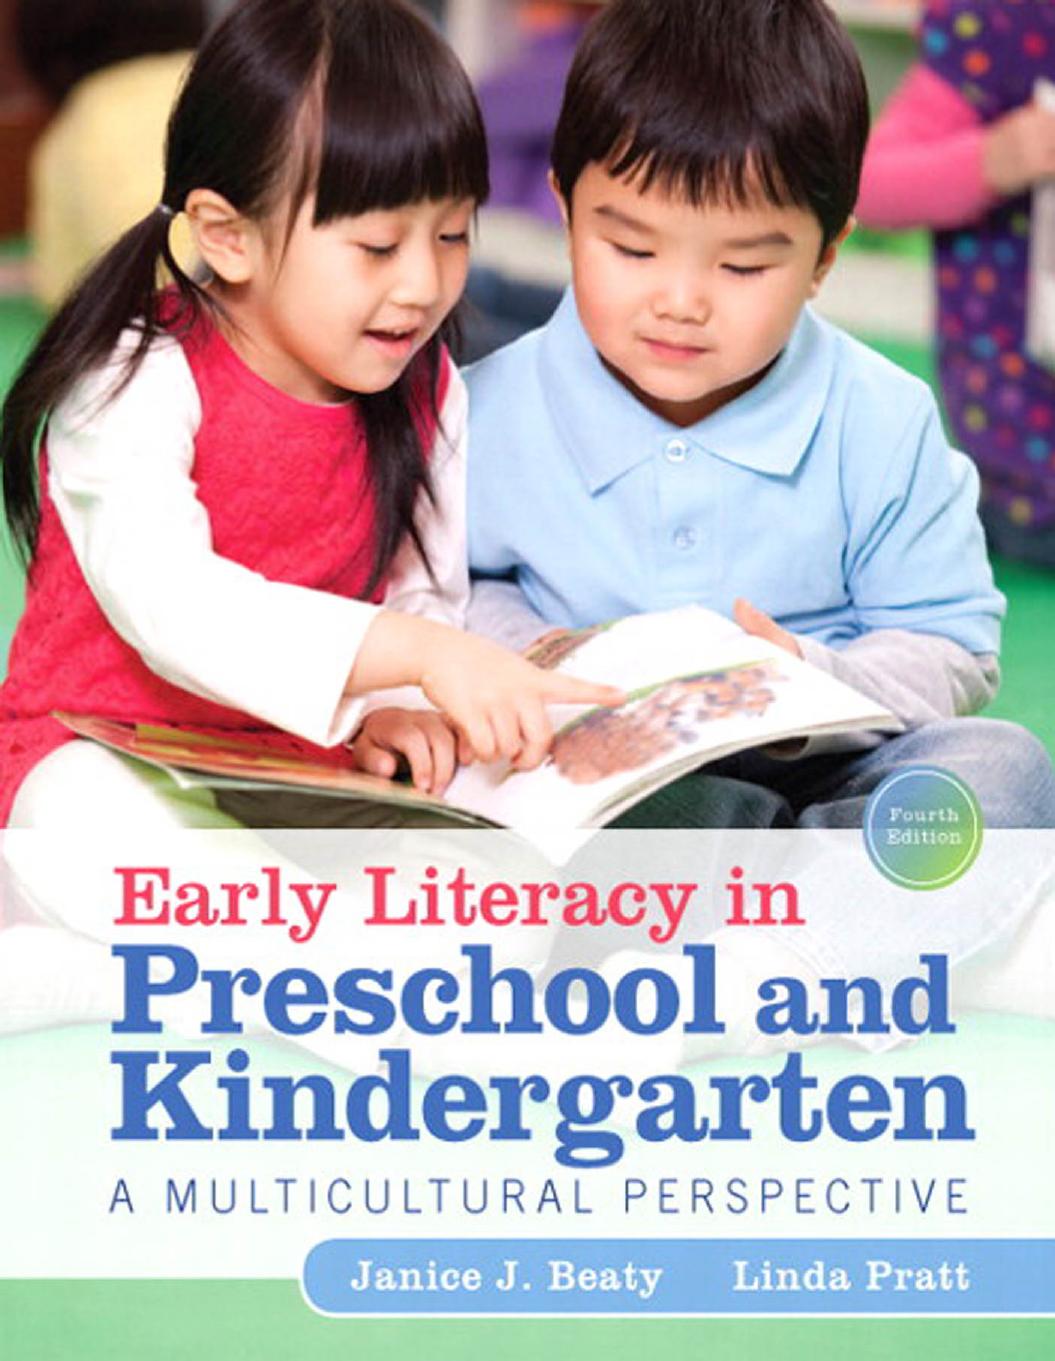 Early Literacy in Preschool and Kindergarten A Multicultural Perspective 4th Edition Janice J. Beaty.jpg